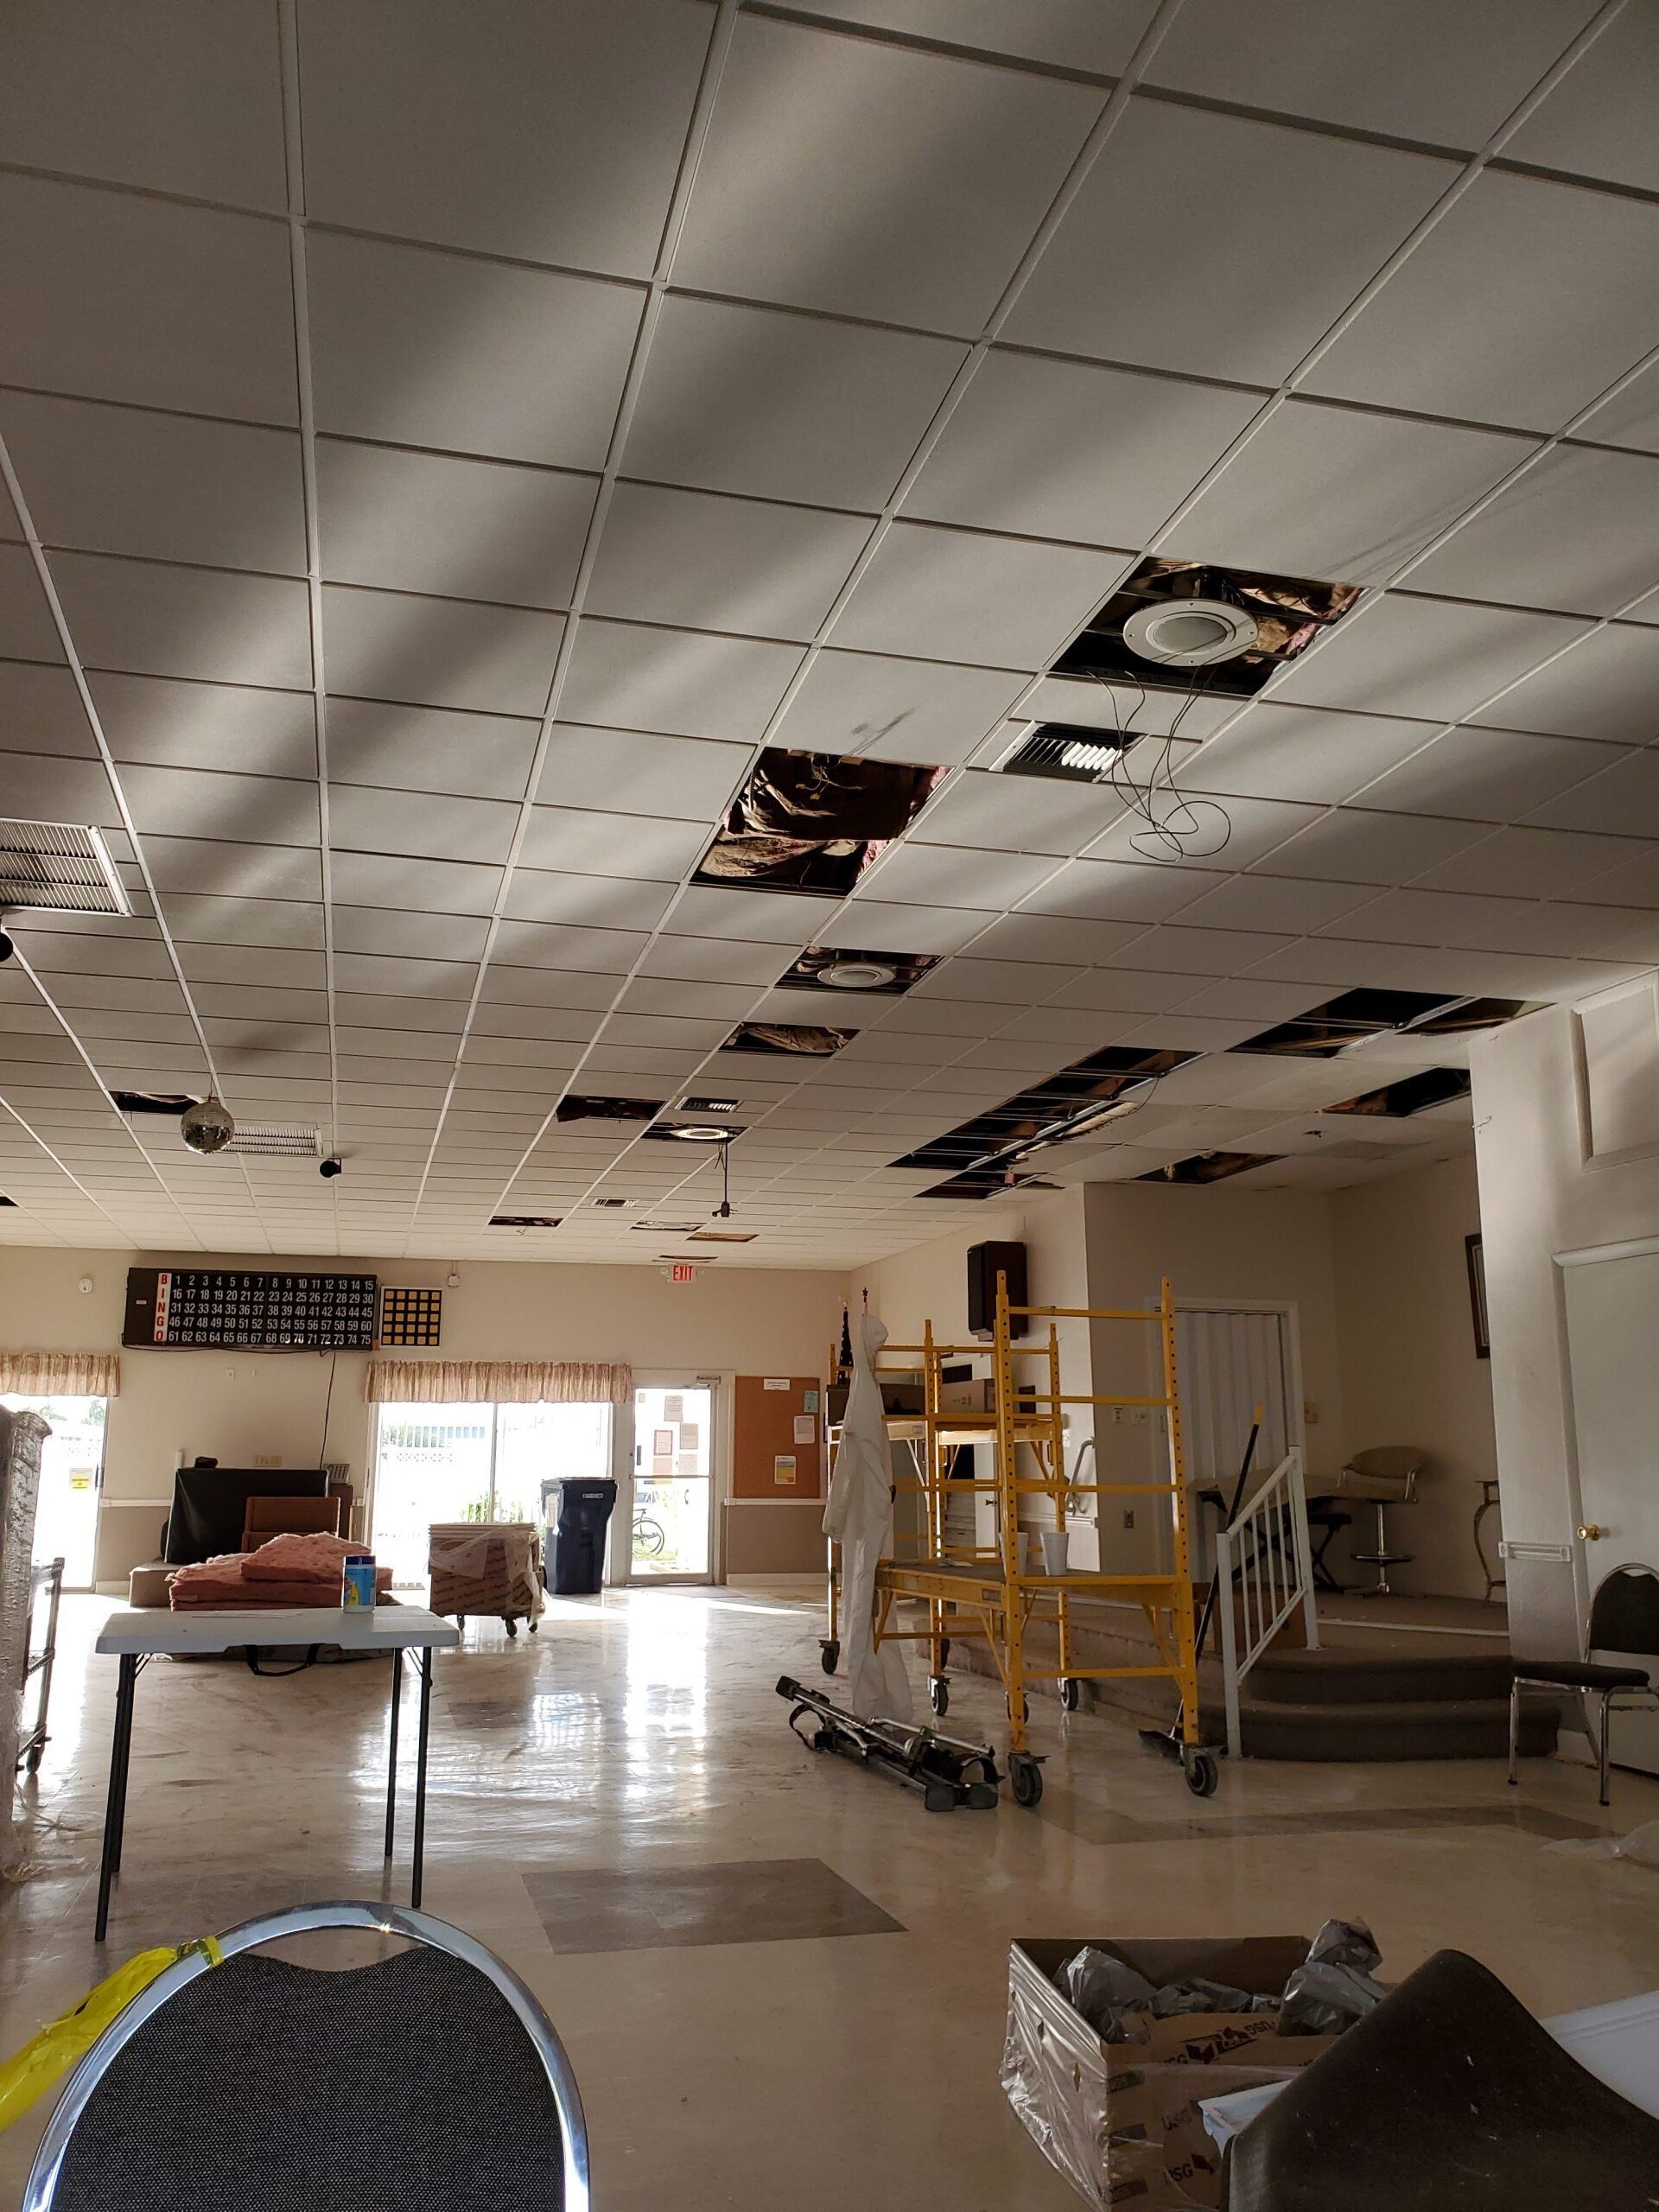 Commercial Acoustic Ceiling Repair in Tampa, FL | Florida Acoustical Services LLC